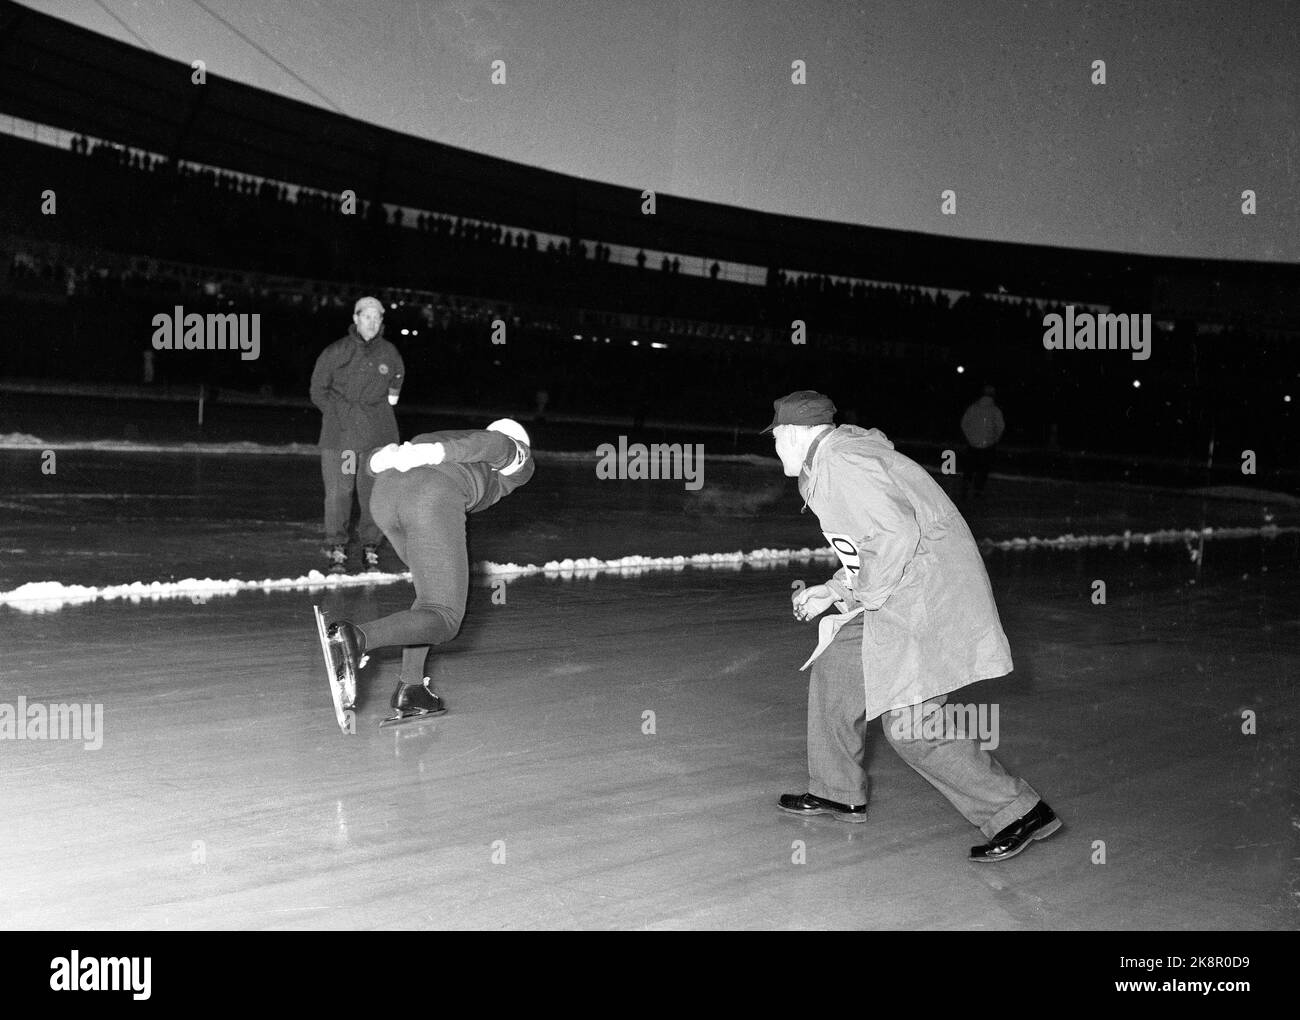 Gothenburg Sweden 19590201 European skating championships, fast runs, at Nya Ullevi in Gothenburg. Knut Johannesen / Kuppern in action of 10,000 meters. His secondary Thorbjørn Kaarstad cheering him on, and keeps him informed about how he is. Photo: NTB / NTB Stock Photo